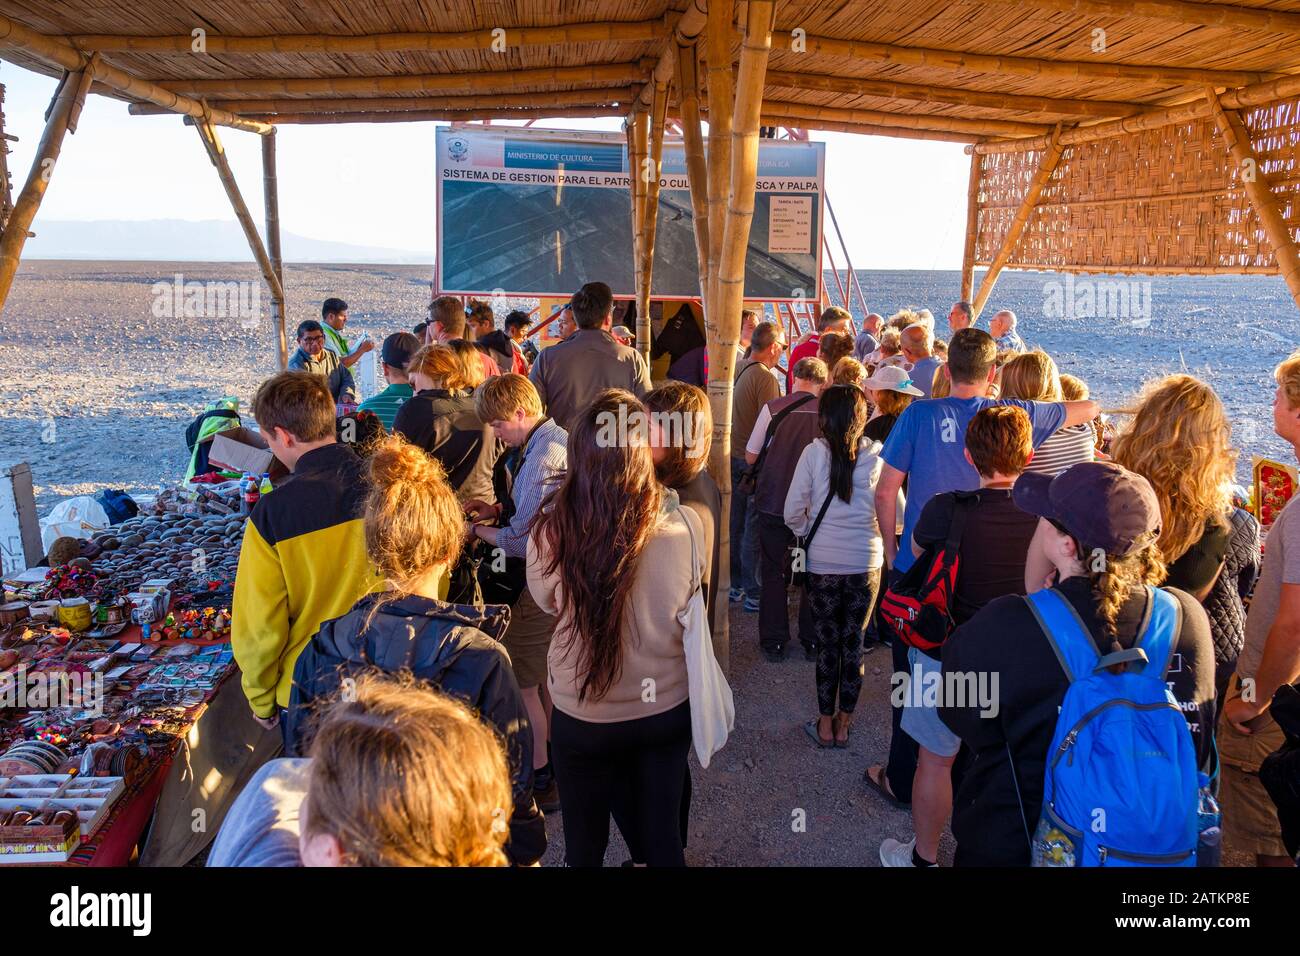 Mass tourism, overtourism, line of tourists waiting to go up Nazca Lines observation tower at sunset, lookout, Nazca, Peru Stock Photo